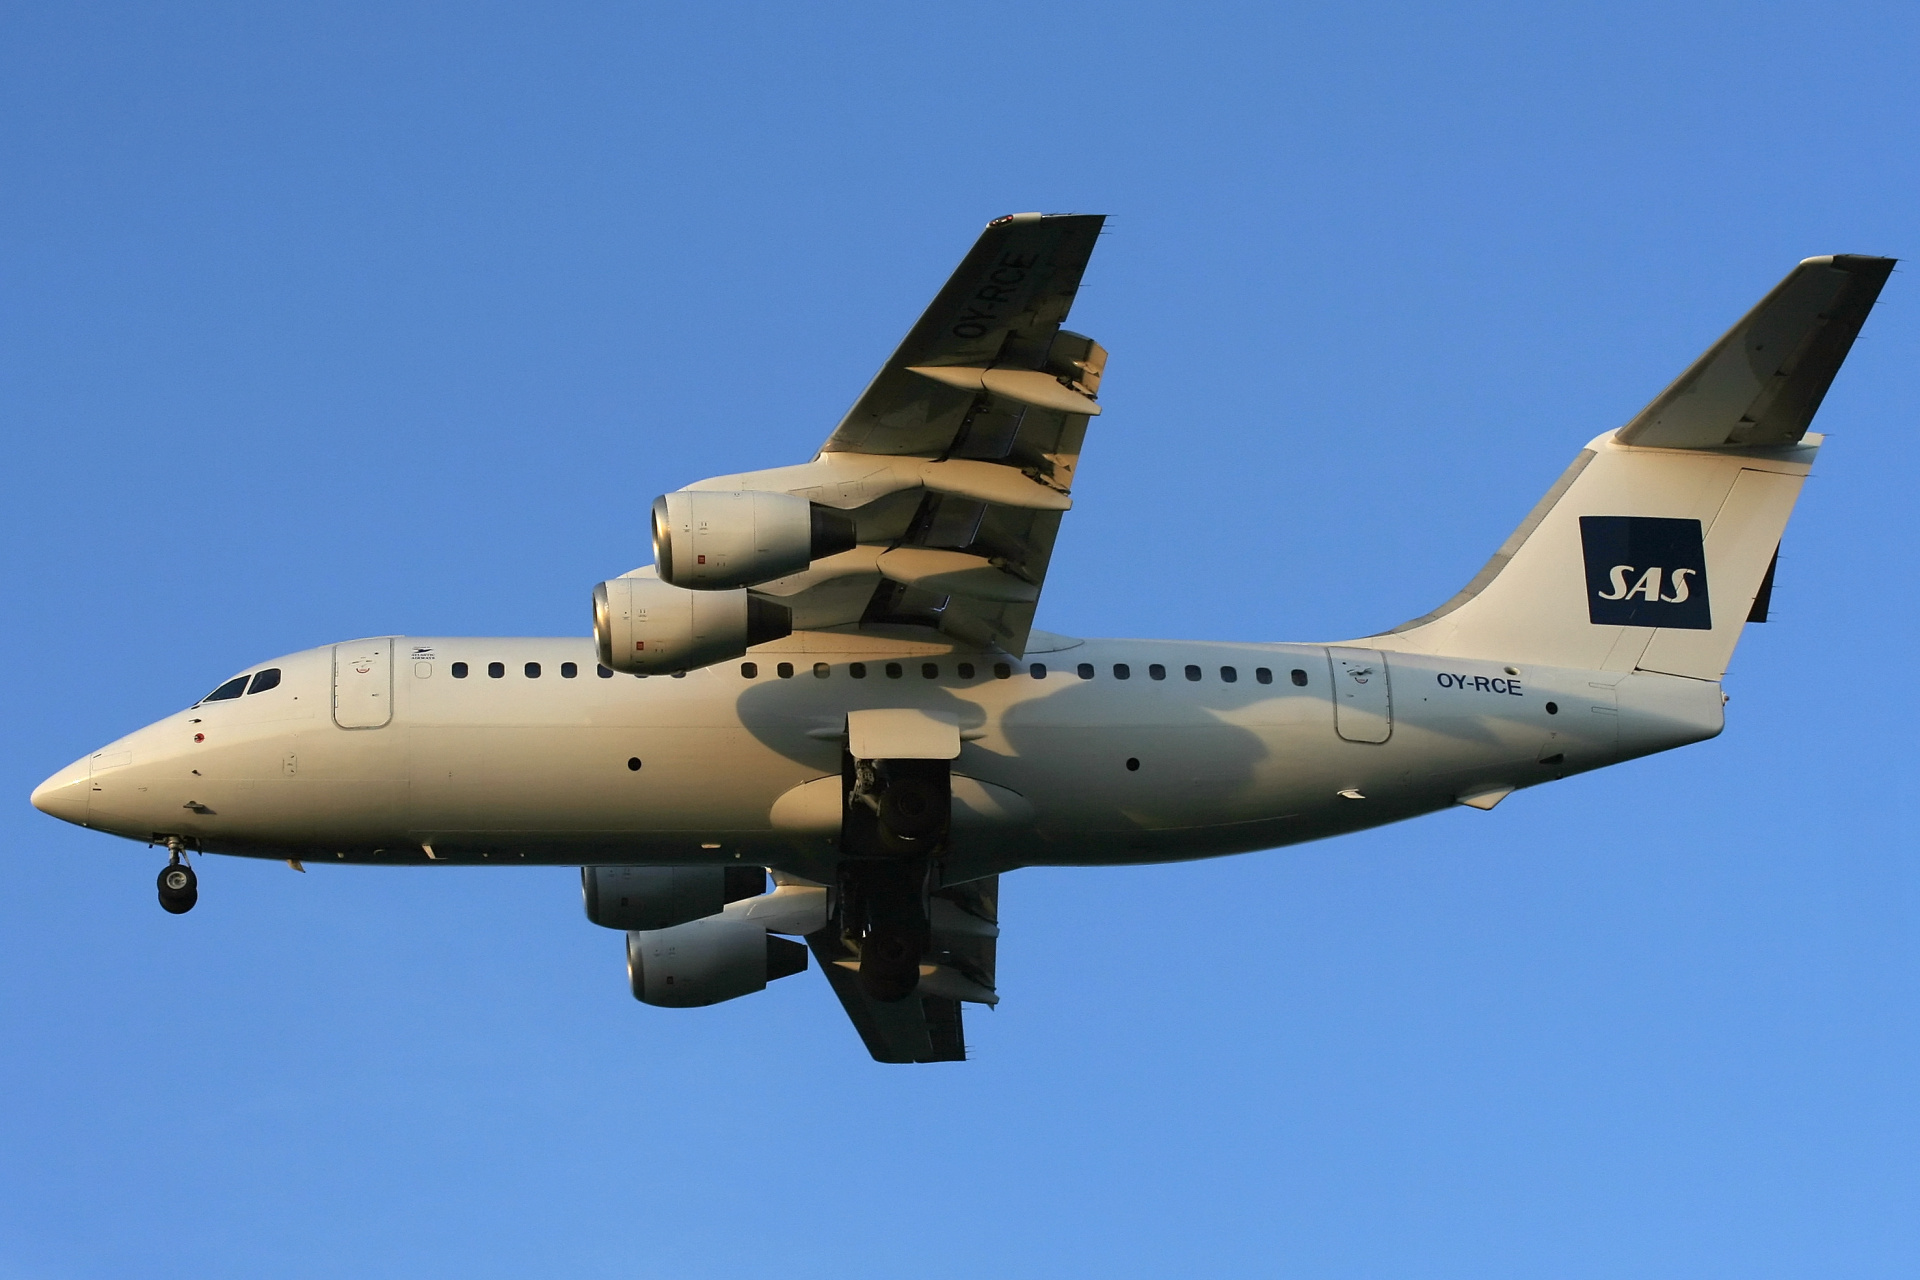 OY-RCE, SAS Scandinavian Airlines (Aircraft » EPWA Spotting » BAe 146 and revisions » Avro RJ85)